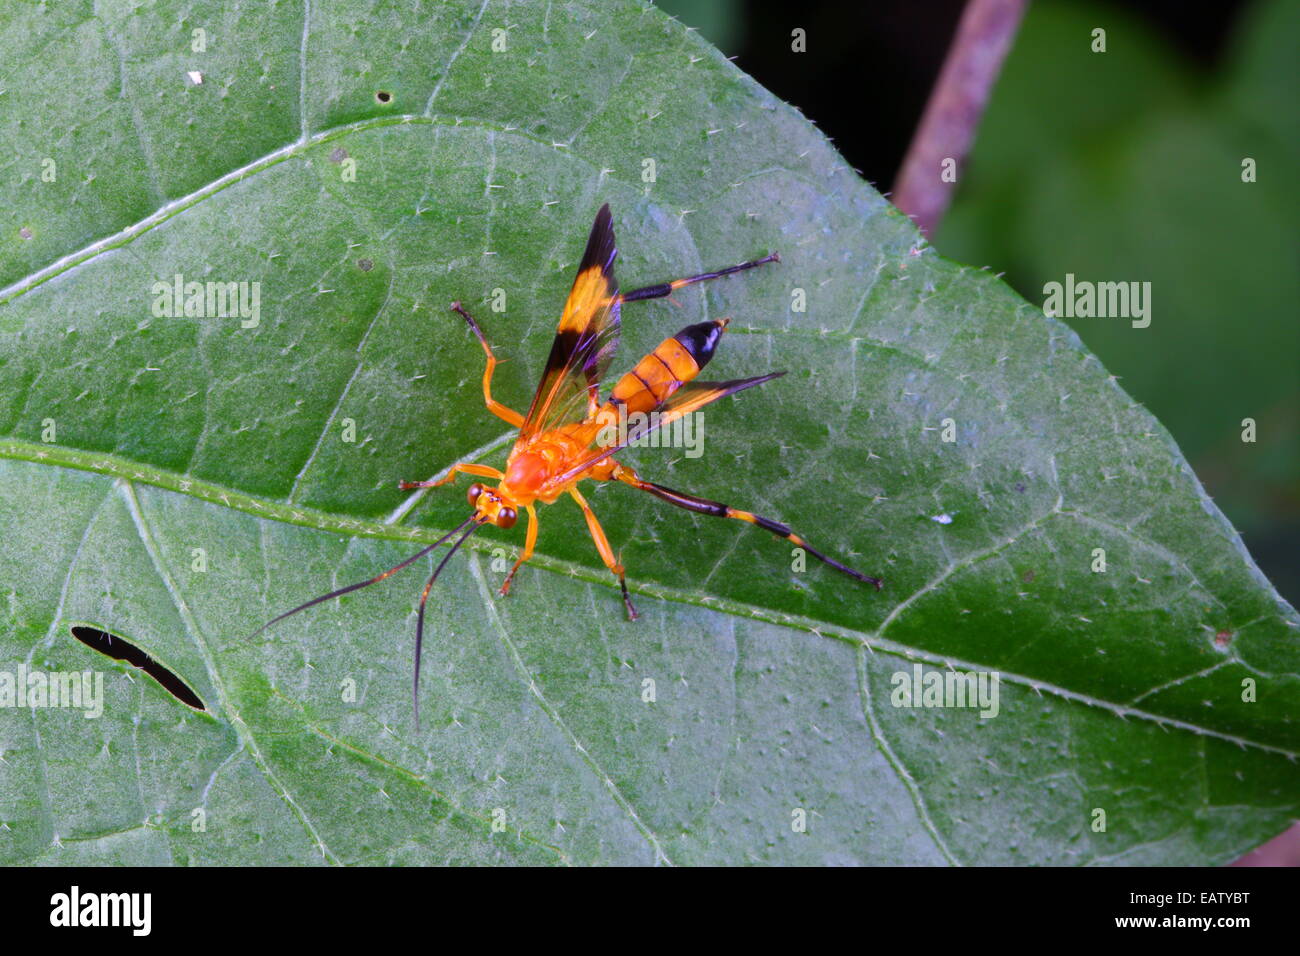 An orange-colored wasp, Hymenoptera species, foraging on a leaf. Stock Photo